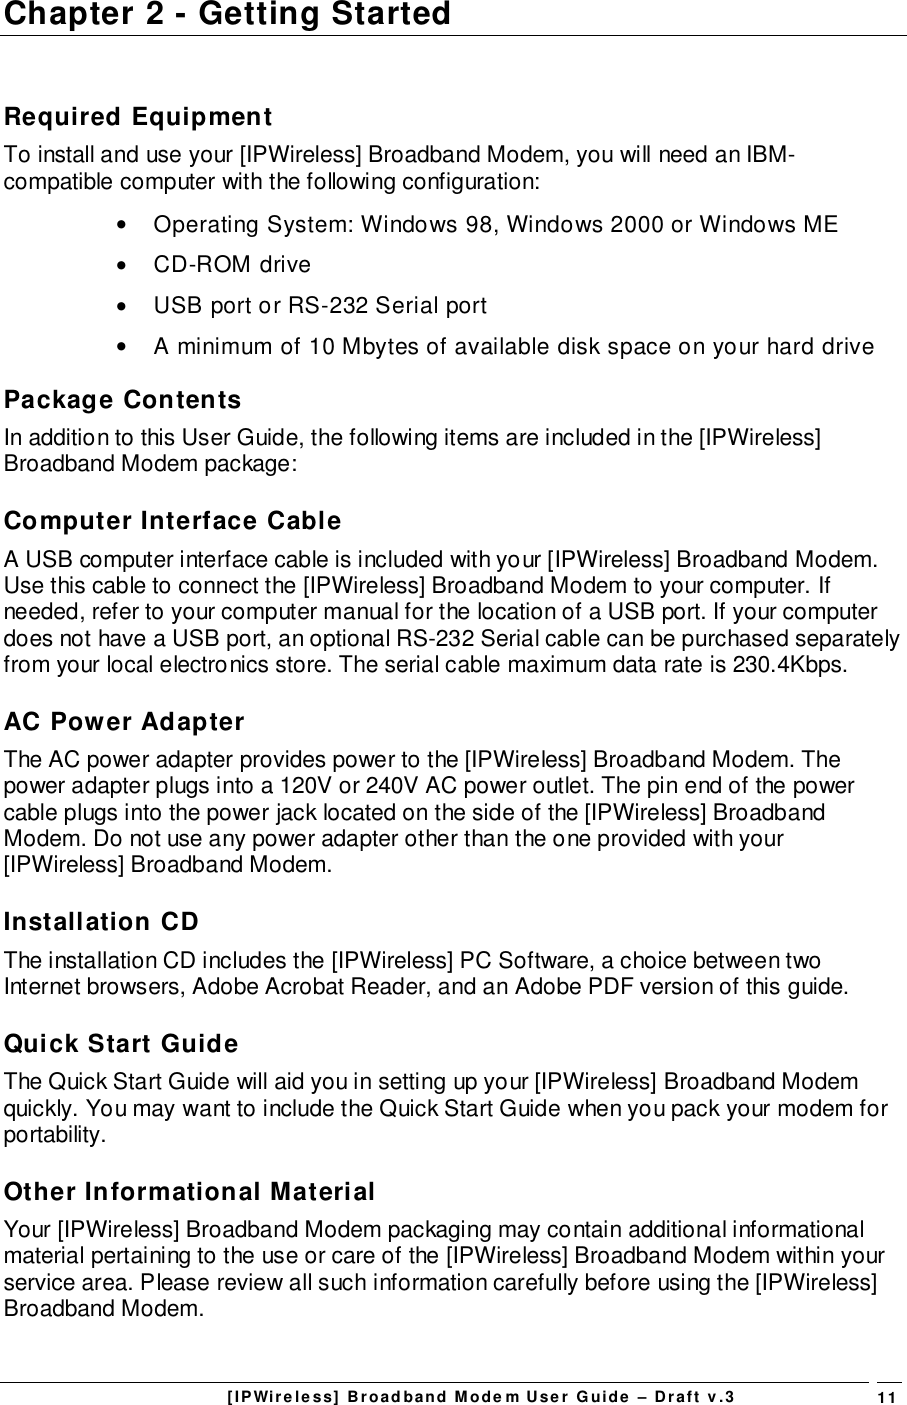 [IPWireless] Broadband Modem User Guide – Draft v.3 11Chapter 2 - Getting StartedRequired EquipmentTo install and use your [IPWireless] Broadband Modem, you will need an IBM-compatible computer with the following configuration:•  Operating System: Windows 98, Windows 2000 or Windows ME• CD-ROM drive•  USB port or RS-232 Serial port•  A minimum of 10 Mbytes of available disk space on your hard drivePackage ContentsIn addition to this User Guide, the following items are included in the [IPWireless]Broadband Modem package:Computer Interface CableA USB computer interface cable is included with your [IPWireless] Broadband Modem.Use this cable to connect the [IPWireless] Broadband Modem to your computer. Ifneeded, refer to your computer manual for the location of a USB port. If your computerdoes not have a USB port, an optional RS-232 Serial cable can be purchased separatelyfrom your local electronics store. The serial cable maximum data rate is 230.4Kbps.AC Power AdapterThe AC power adapter provides power to the [IPWireless] Broadband Modem. Thepower adapter plugs into a 120V or 240V AC power outlet. The pin end of the powercable plugs into the power jack located on the side of the [IPWireless] BroadbandModem. Do not use any power adapter other than the one provided with your[IPWireless] Broadband Modem.Installation CDThe installation CD includes the [IPWireless] PC Software, a choice between twoInternet browsers, Adobe Acrobat Reader, and an Adobe PDF version of this guide.Quick Start GuideThe Quick Start Guide will aid you in setting up your [IPWireless] Broadband Modemquickly. You may want to include the Quick Start Guide when you pack your modem forportability.Other Informational MaterialYour [IPWireless] Broadband Modem packaging may contain additional informationalmaterial pertaining to the use or care of the [IPWireless] Broadband Modem within yourservice area. Please review all such information carefully before using the [IPWireless]Broadband Modem.